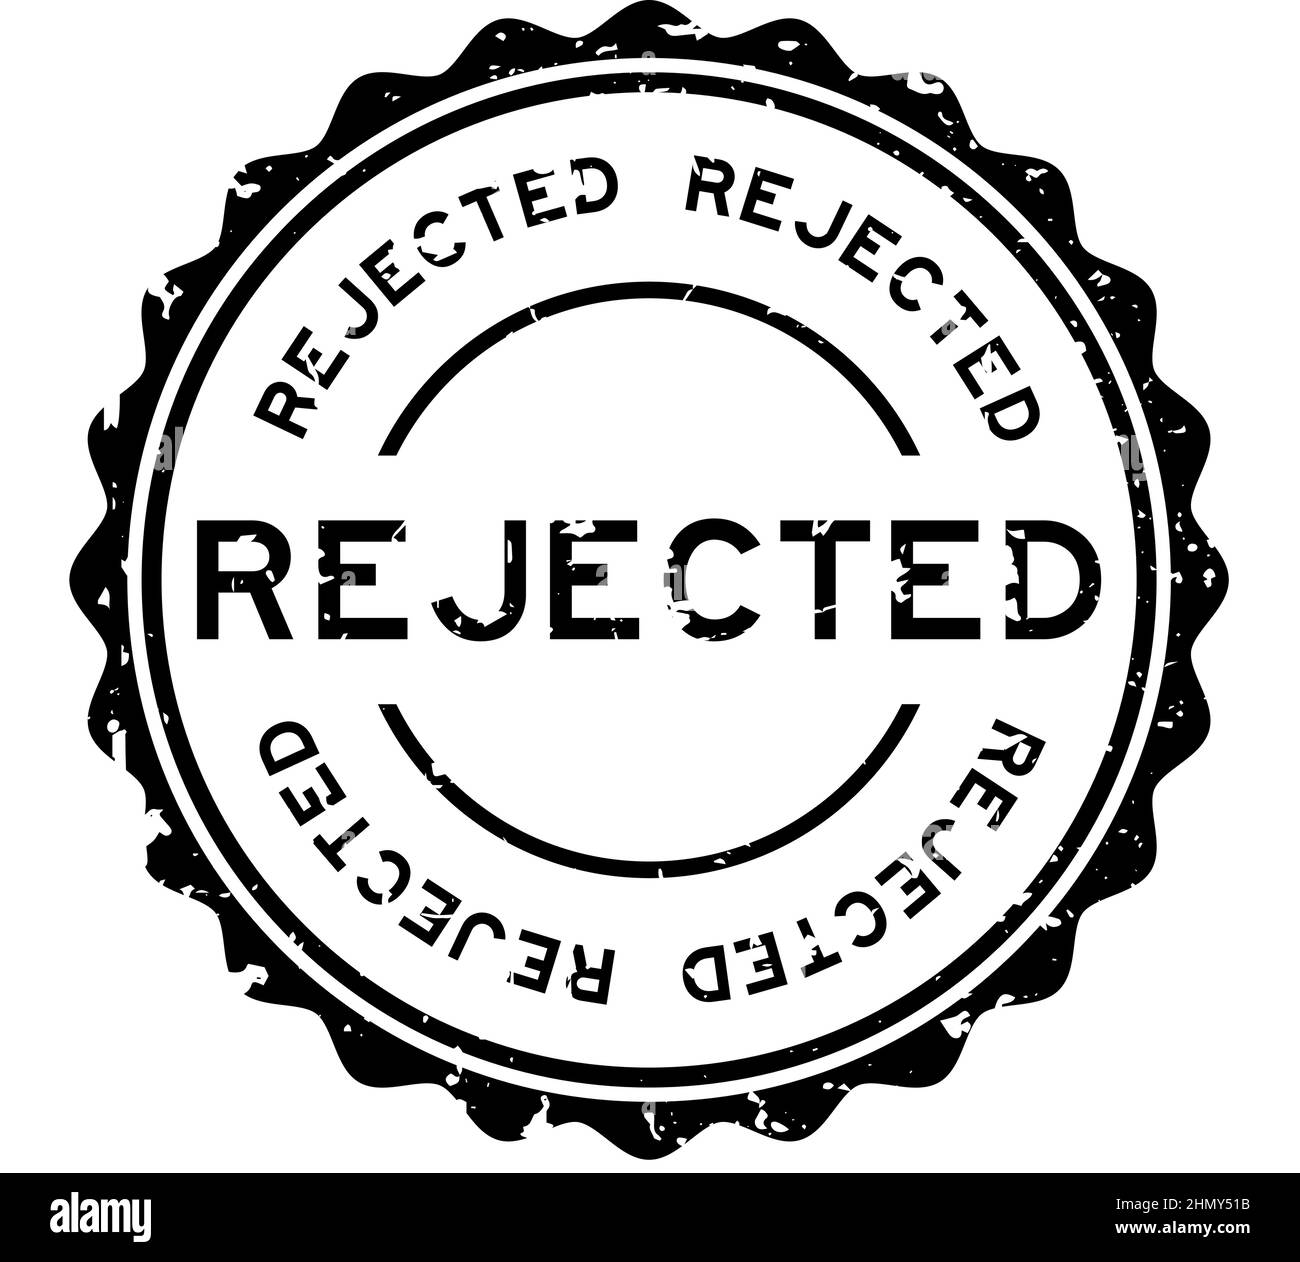 Grunge black rejected word round rubber seal stamp on white background Stock Vector